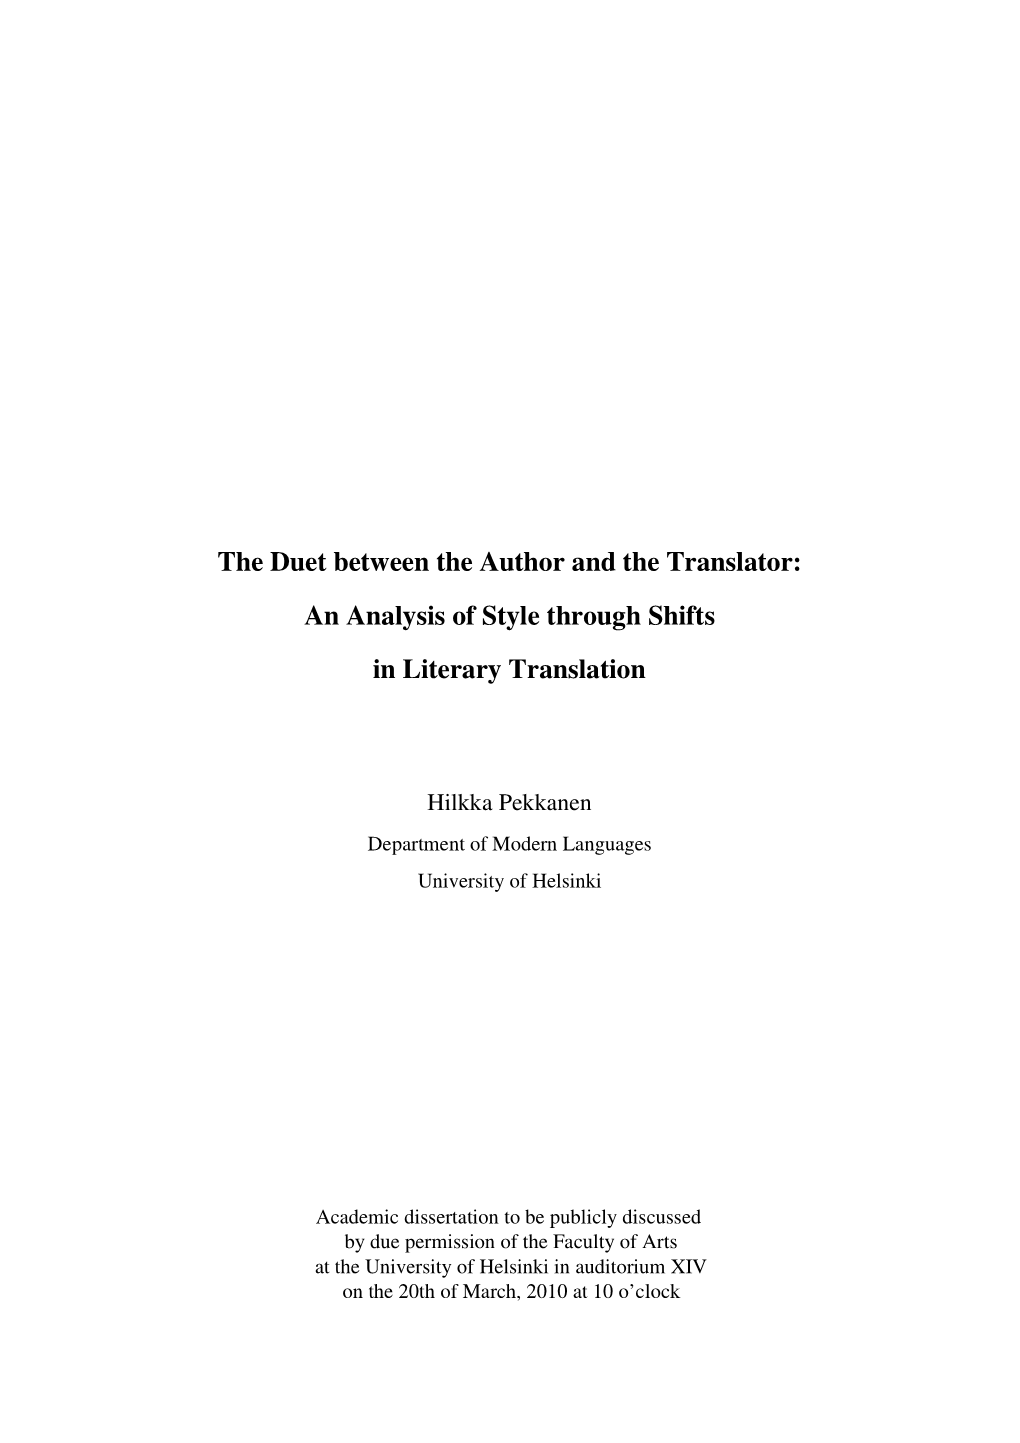 An Analysis of Style Through Shifts in Literary Translation